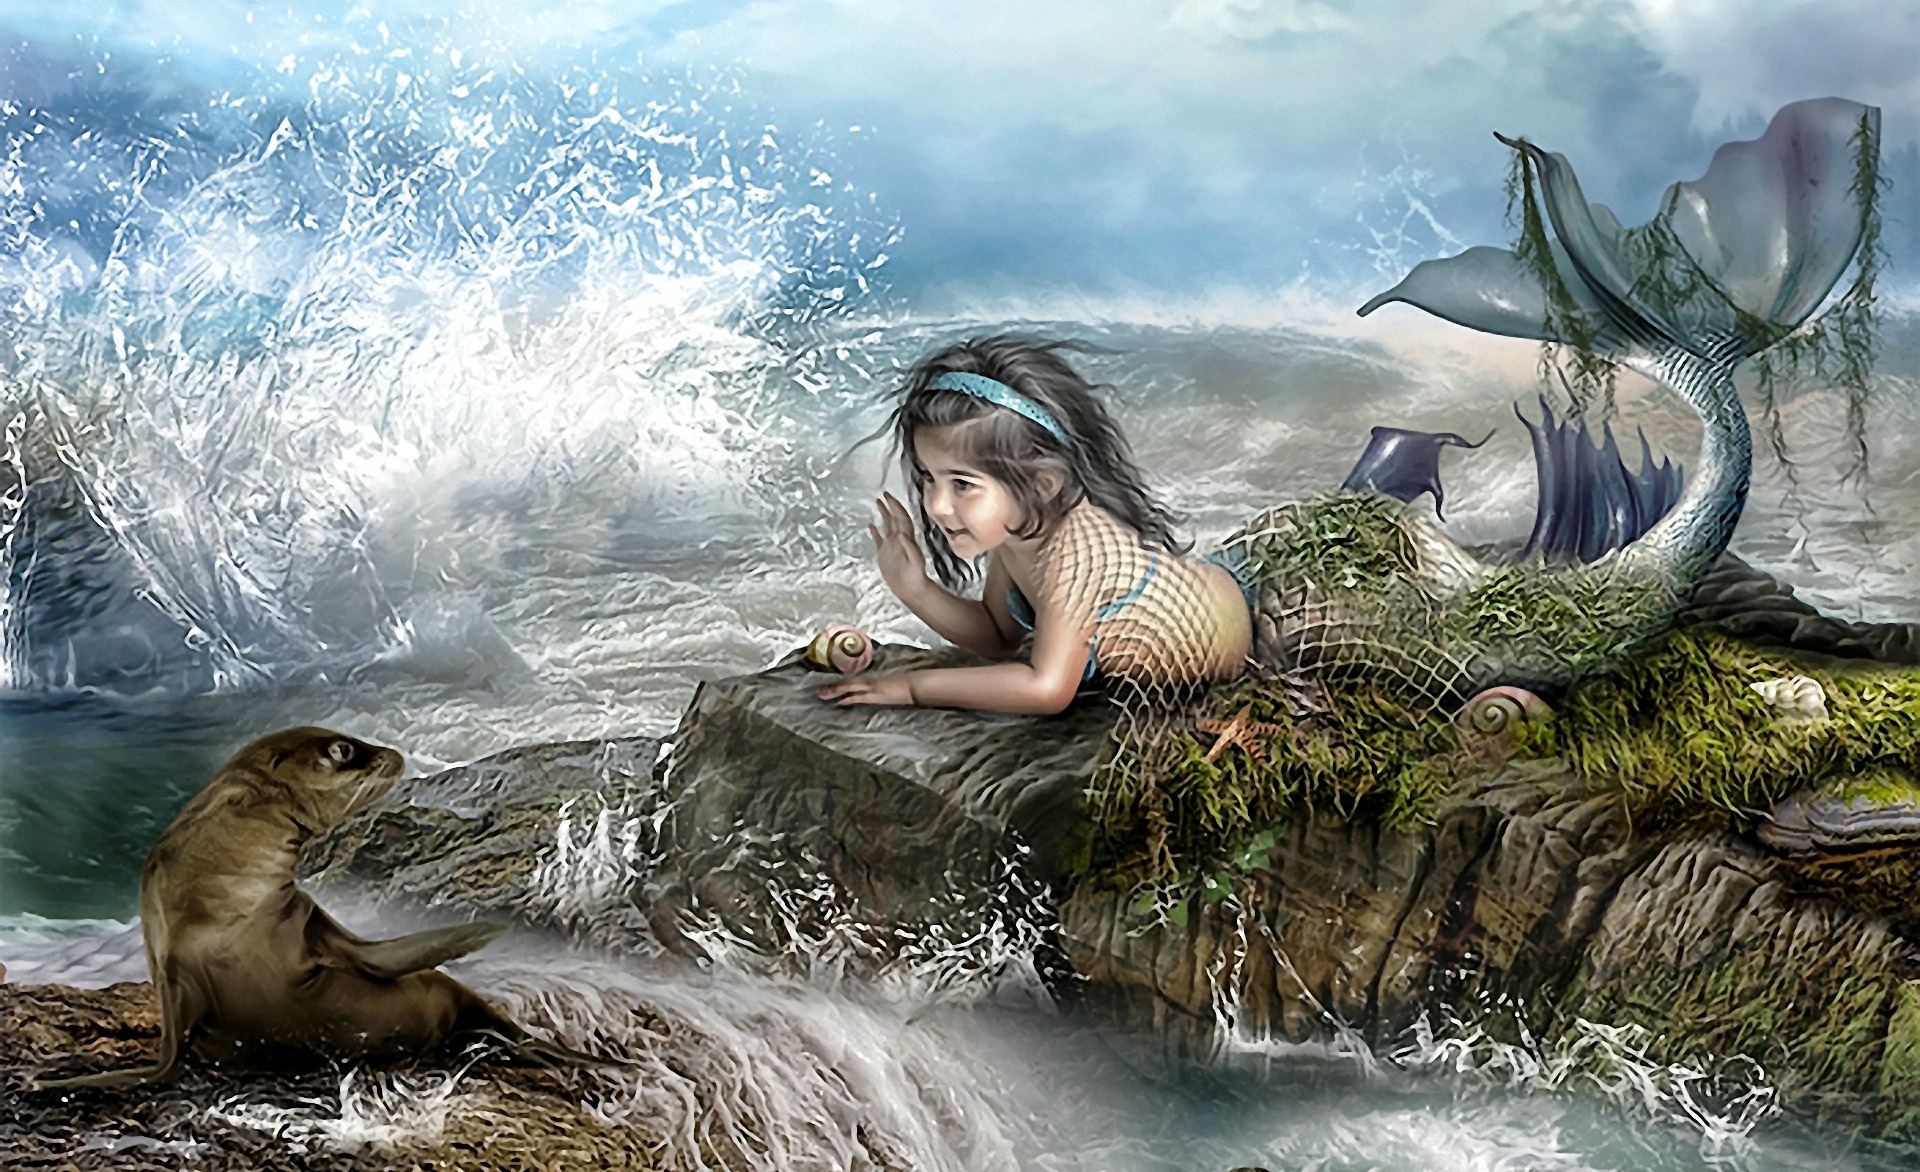 134 Mermaid Hd Wallpapers Backgrounds Wallpaper Abyss